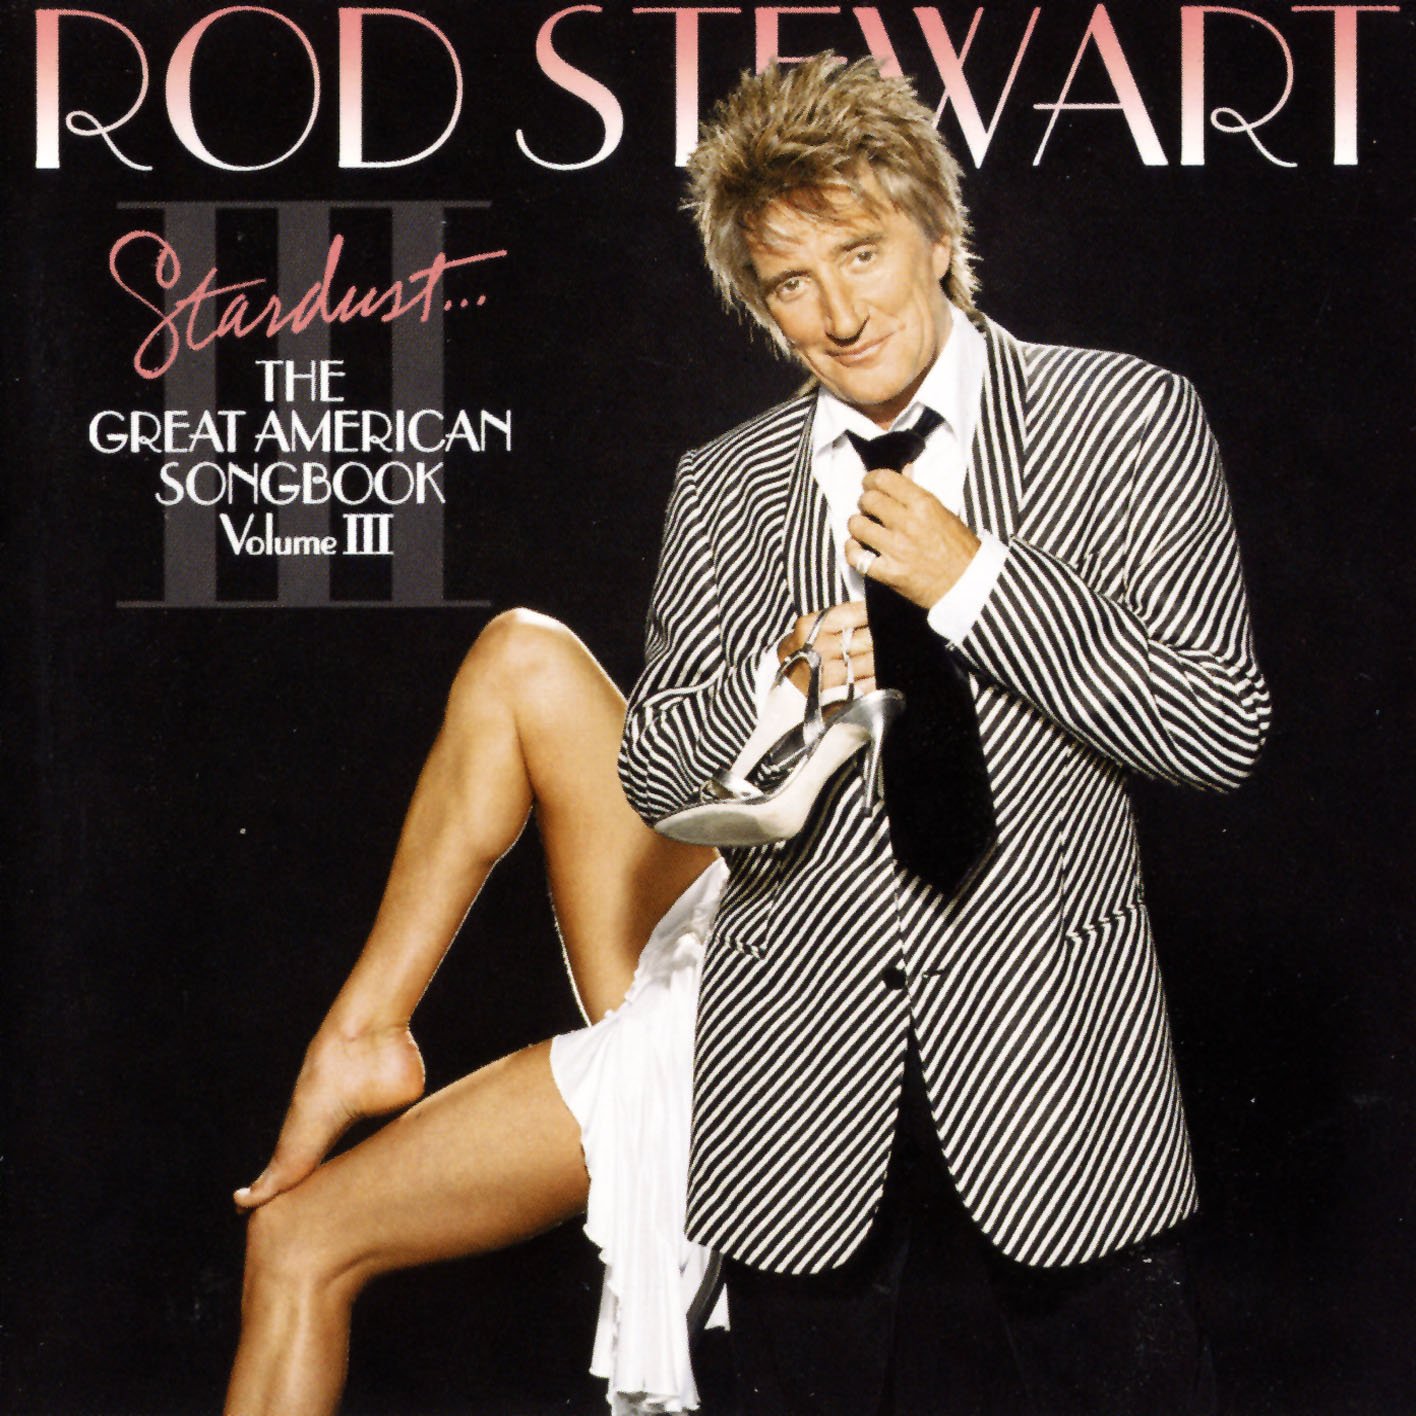 Stardust…The Great American Songbook III